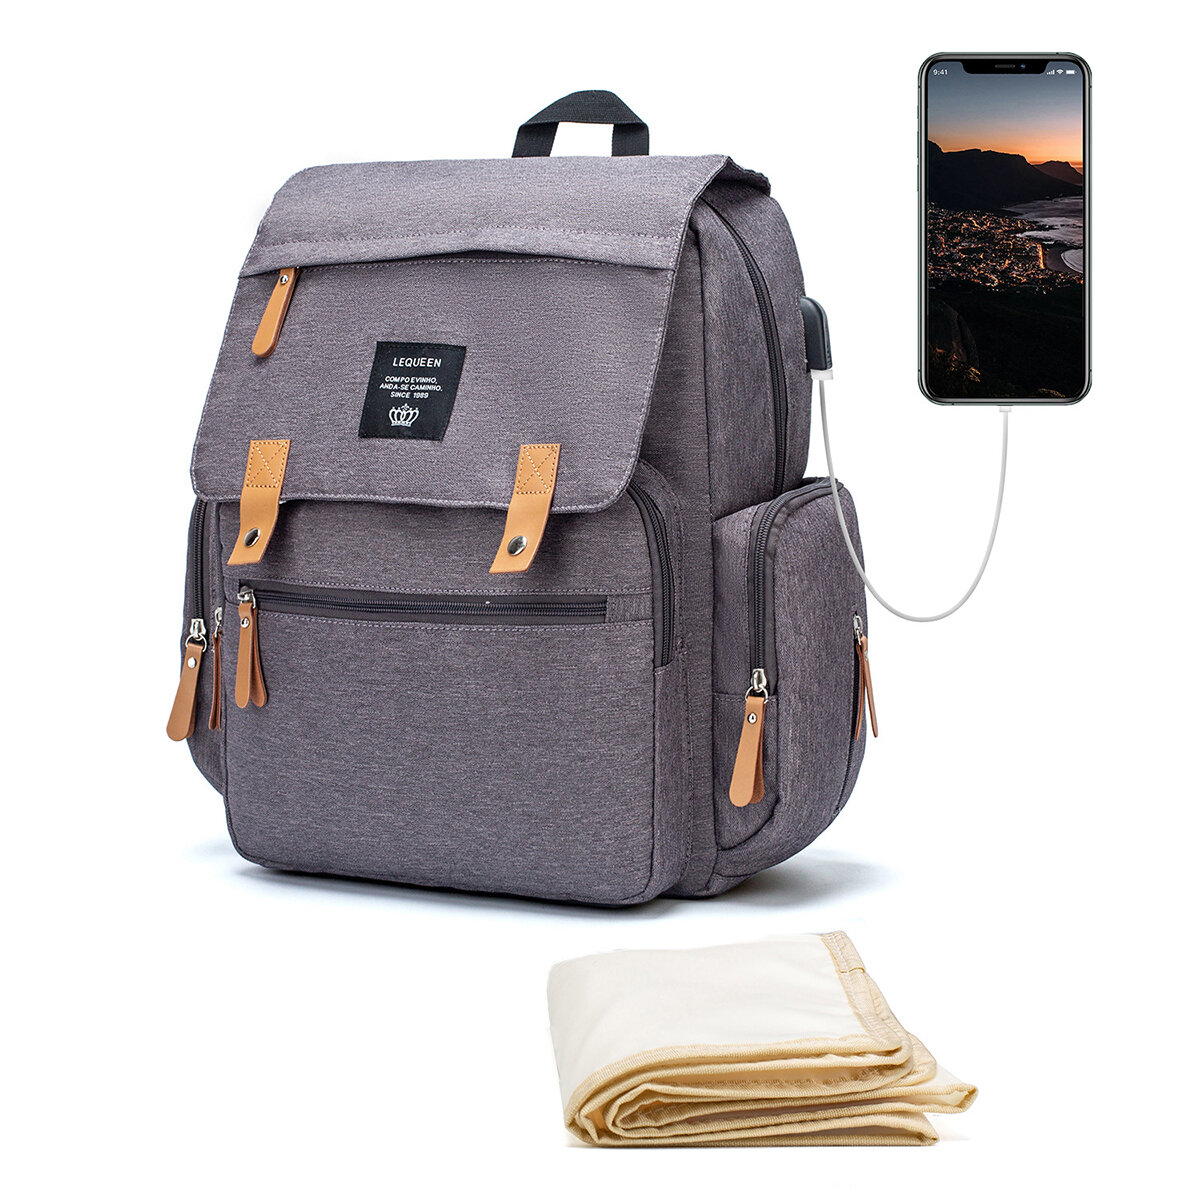 Multifunctional Outdoor Travel Backpack With USB Port Large Capacity Waterproof Shoulder Bag For Out